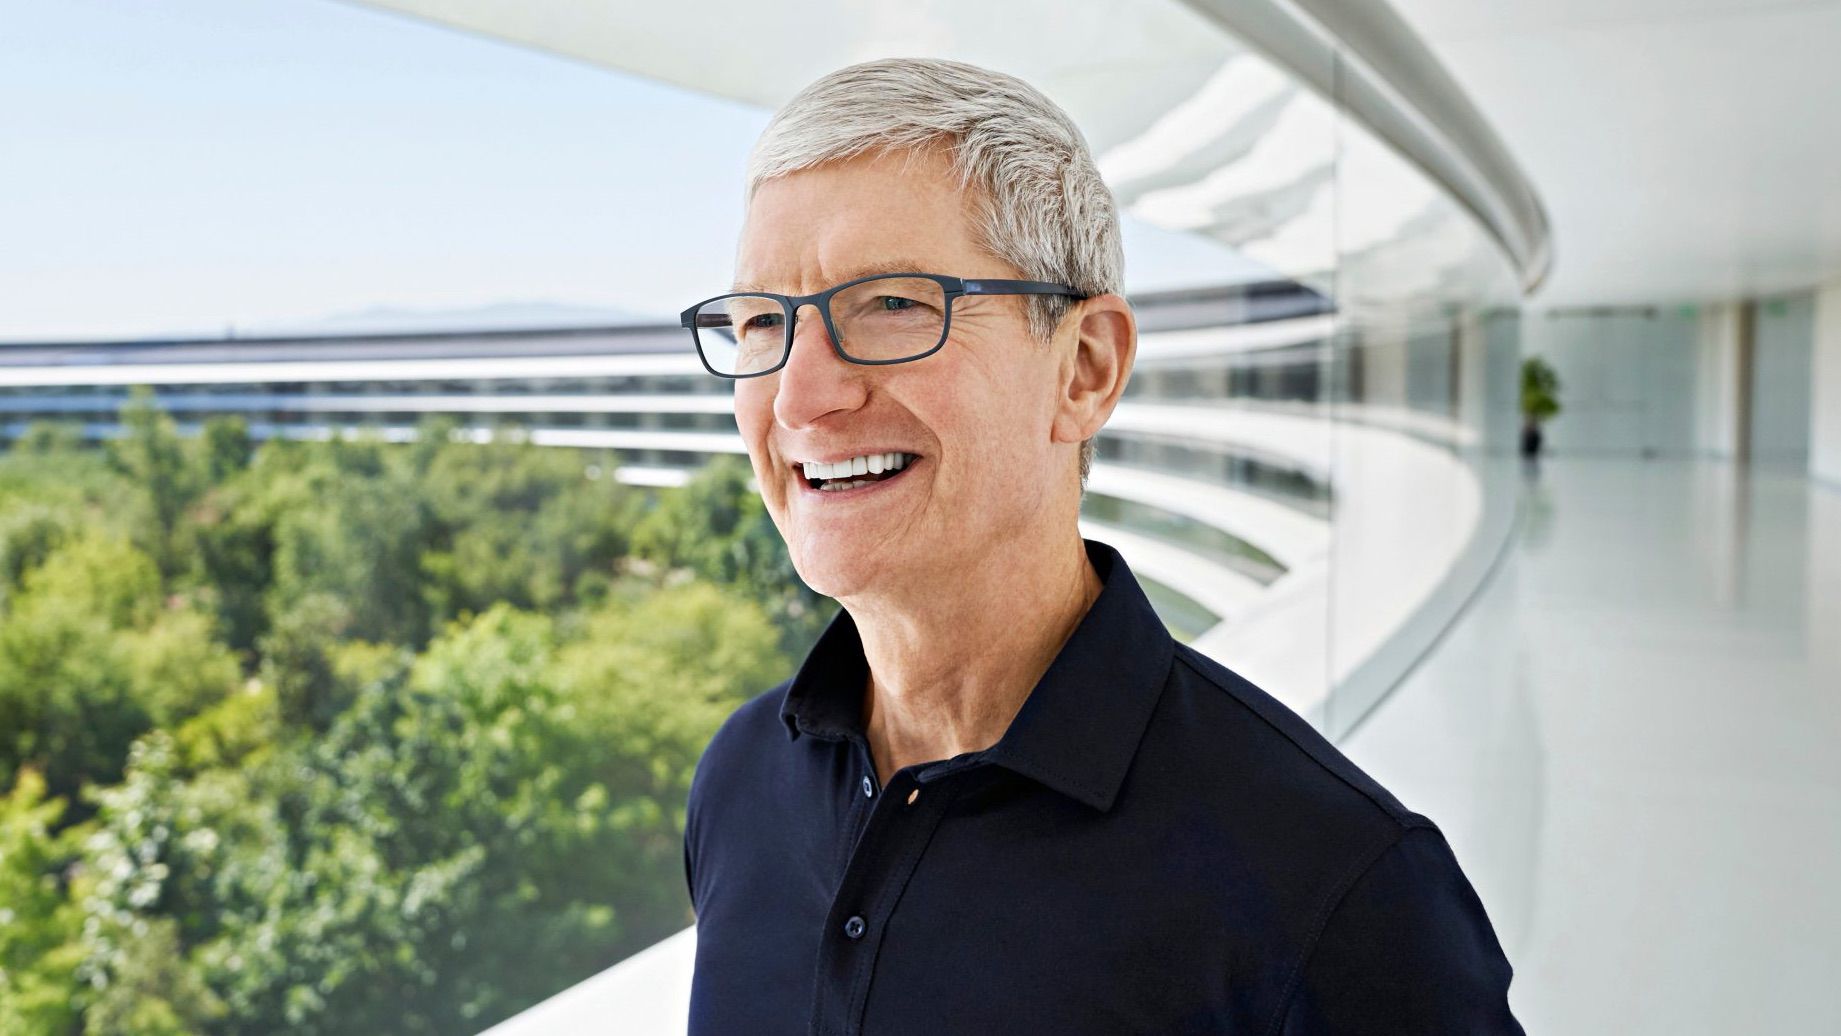 Tim Cook Wants Apple Devices to Be Used for Creativity, Not 'Endless, Mindless Scrolling'